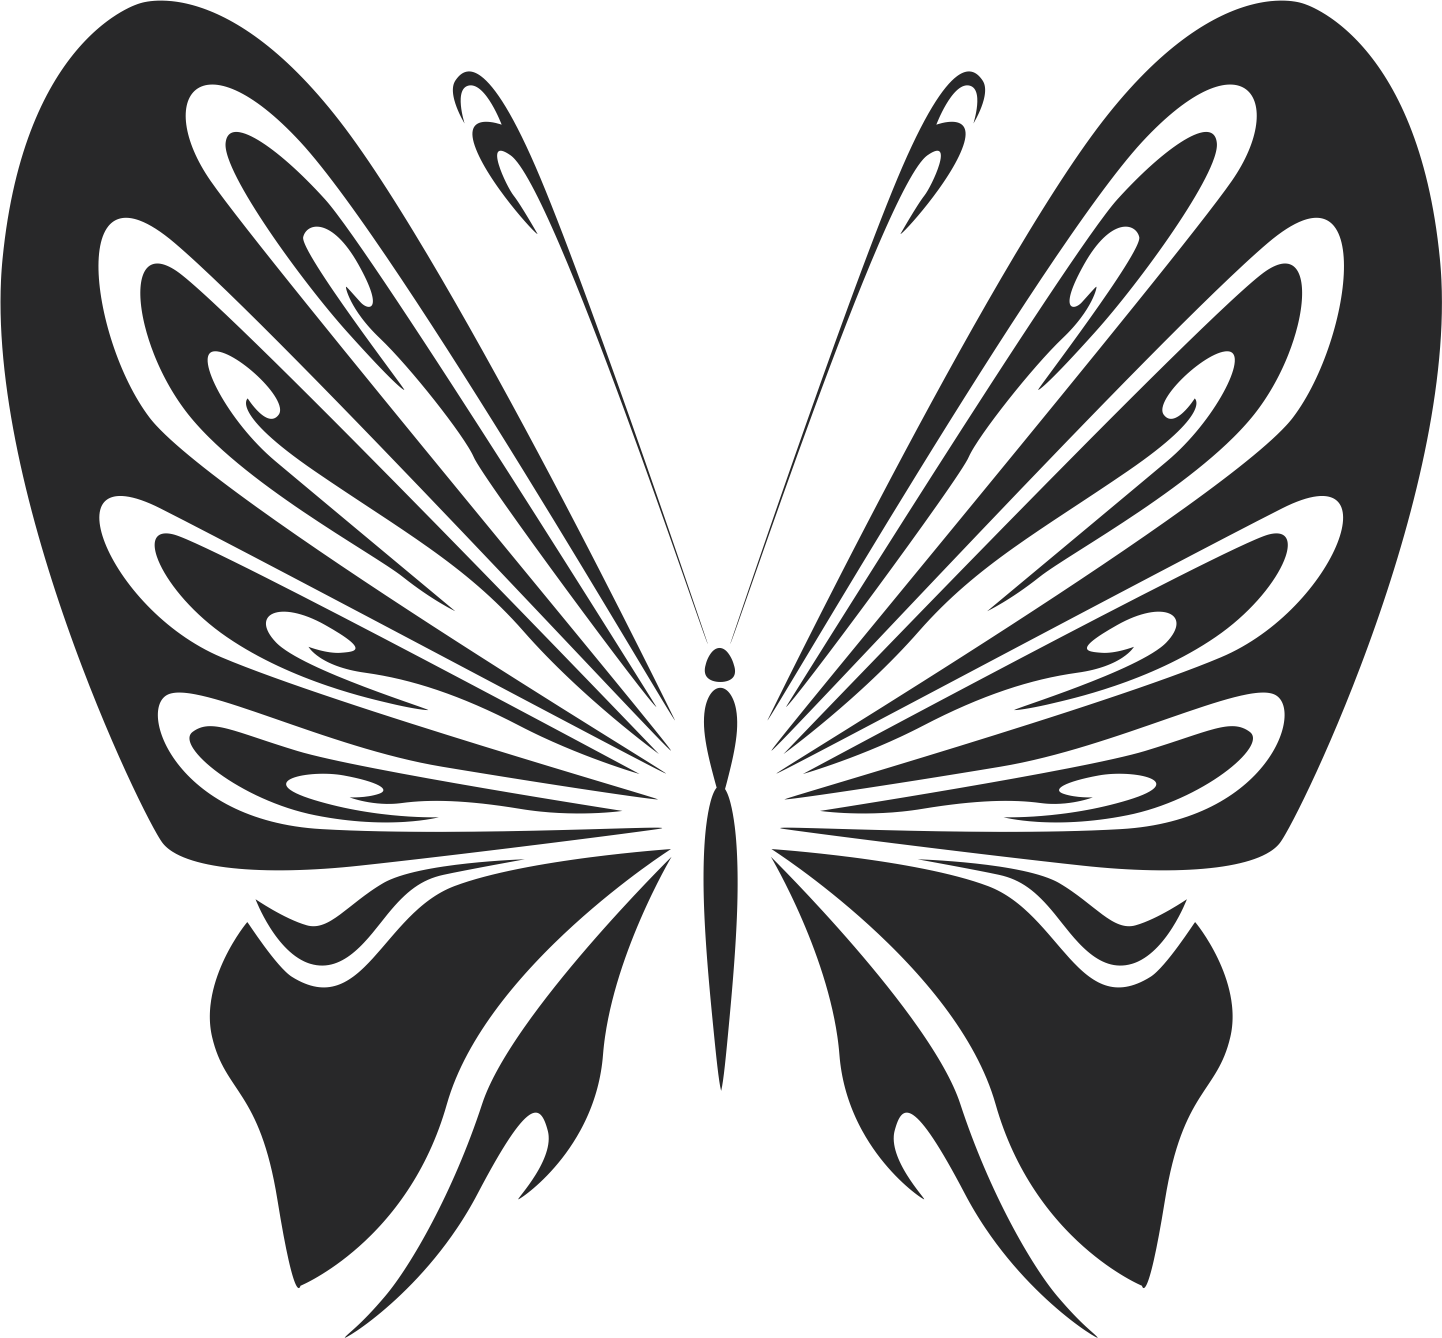 Download Vintage Butterfly Stencils Free Vector cdr Download - 3axis.co